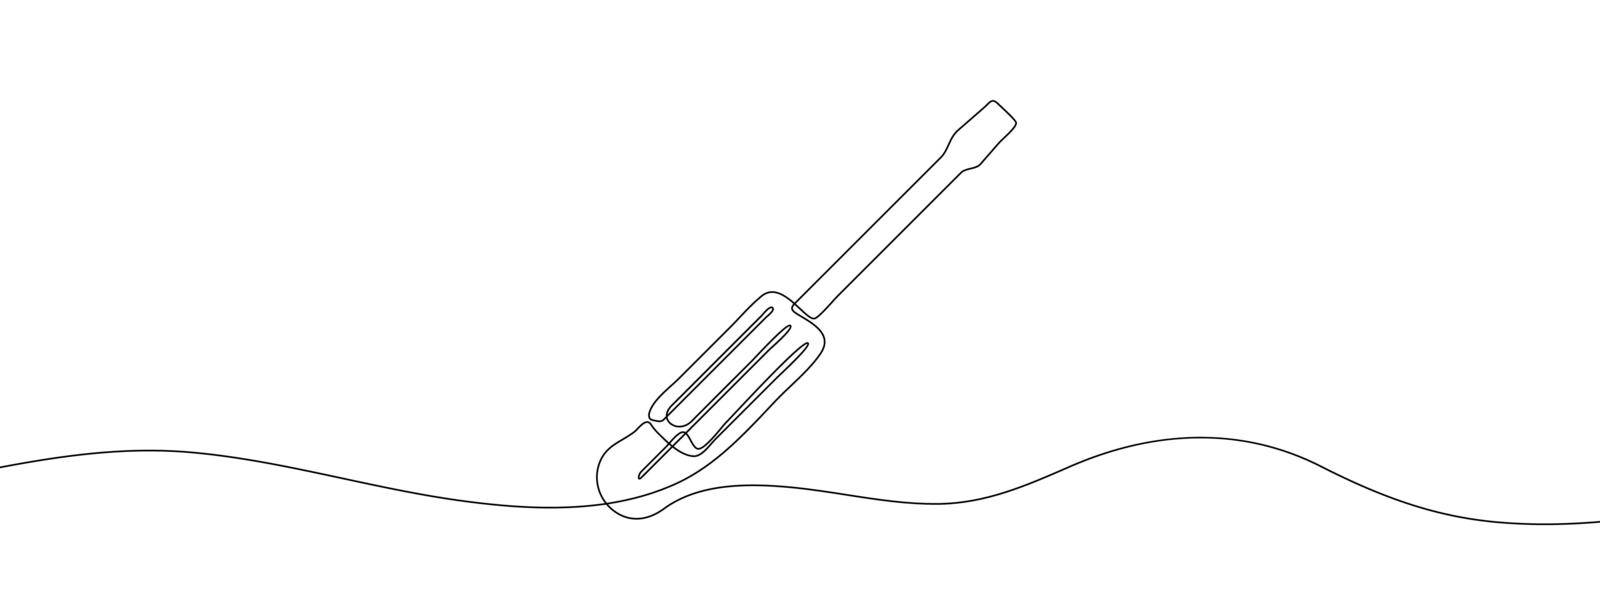 Continuous line drawing of screwdriver. Screwdriver continuous line icon. by Chekman